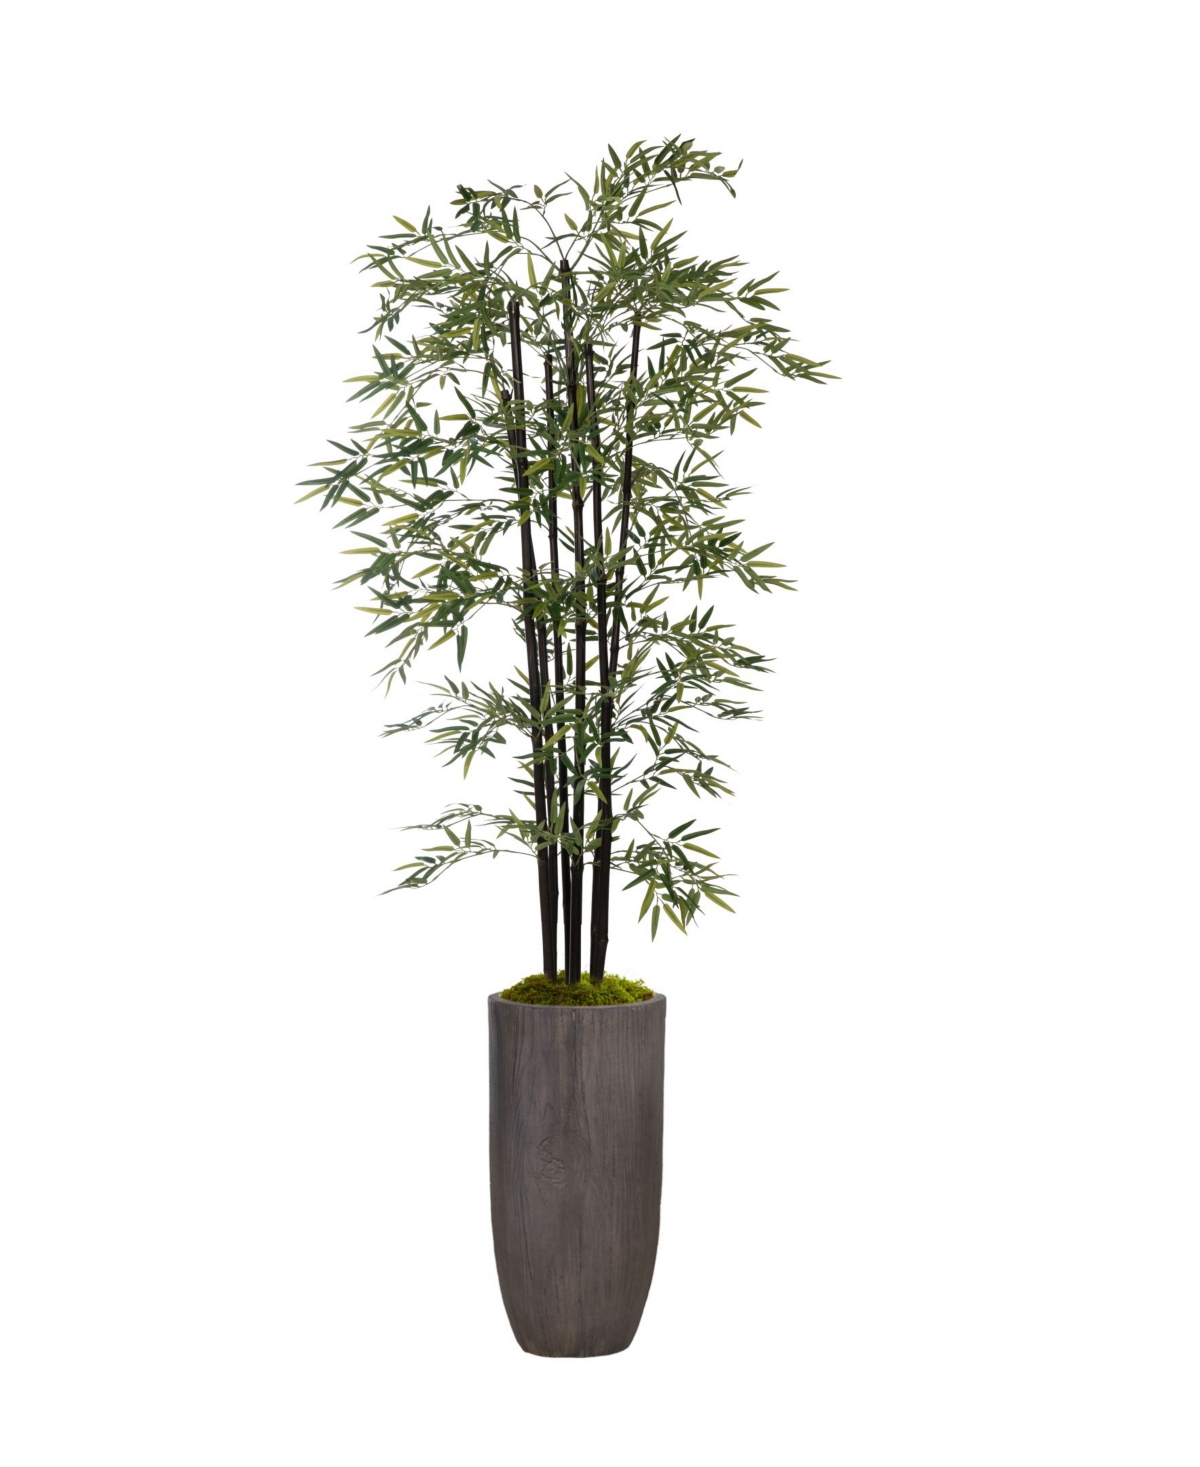 86.25" Tall Bamboo Tree With Decorative Black Poles and Fiberstone Planter - Green